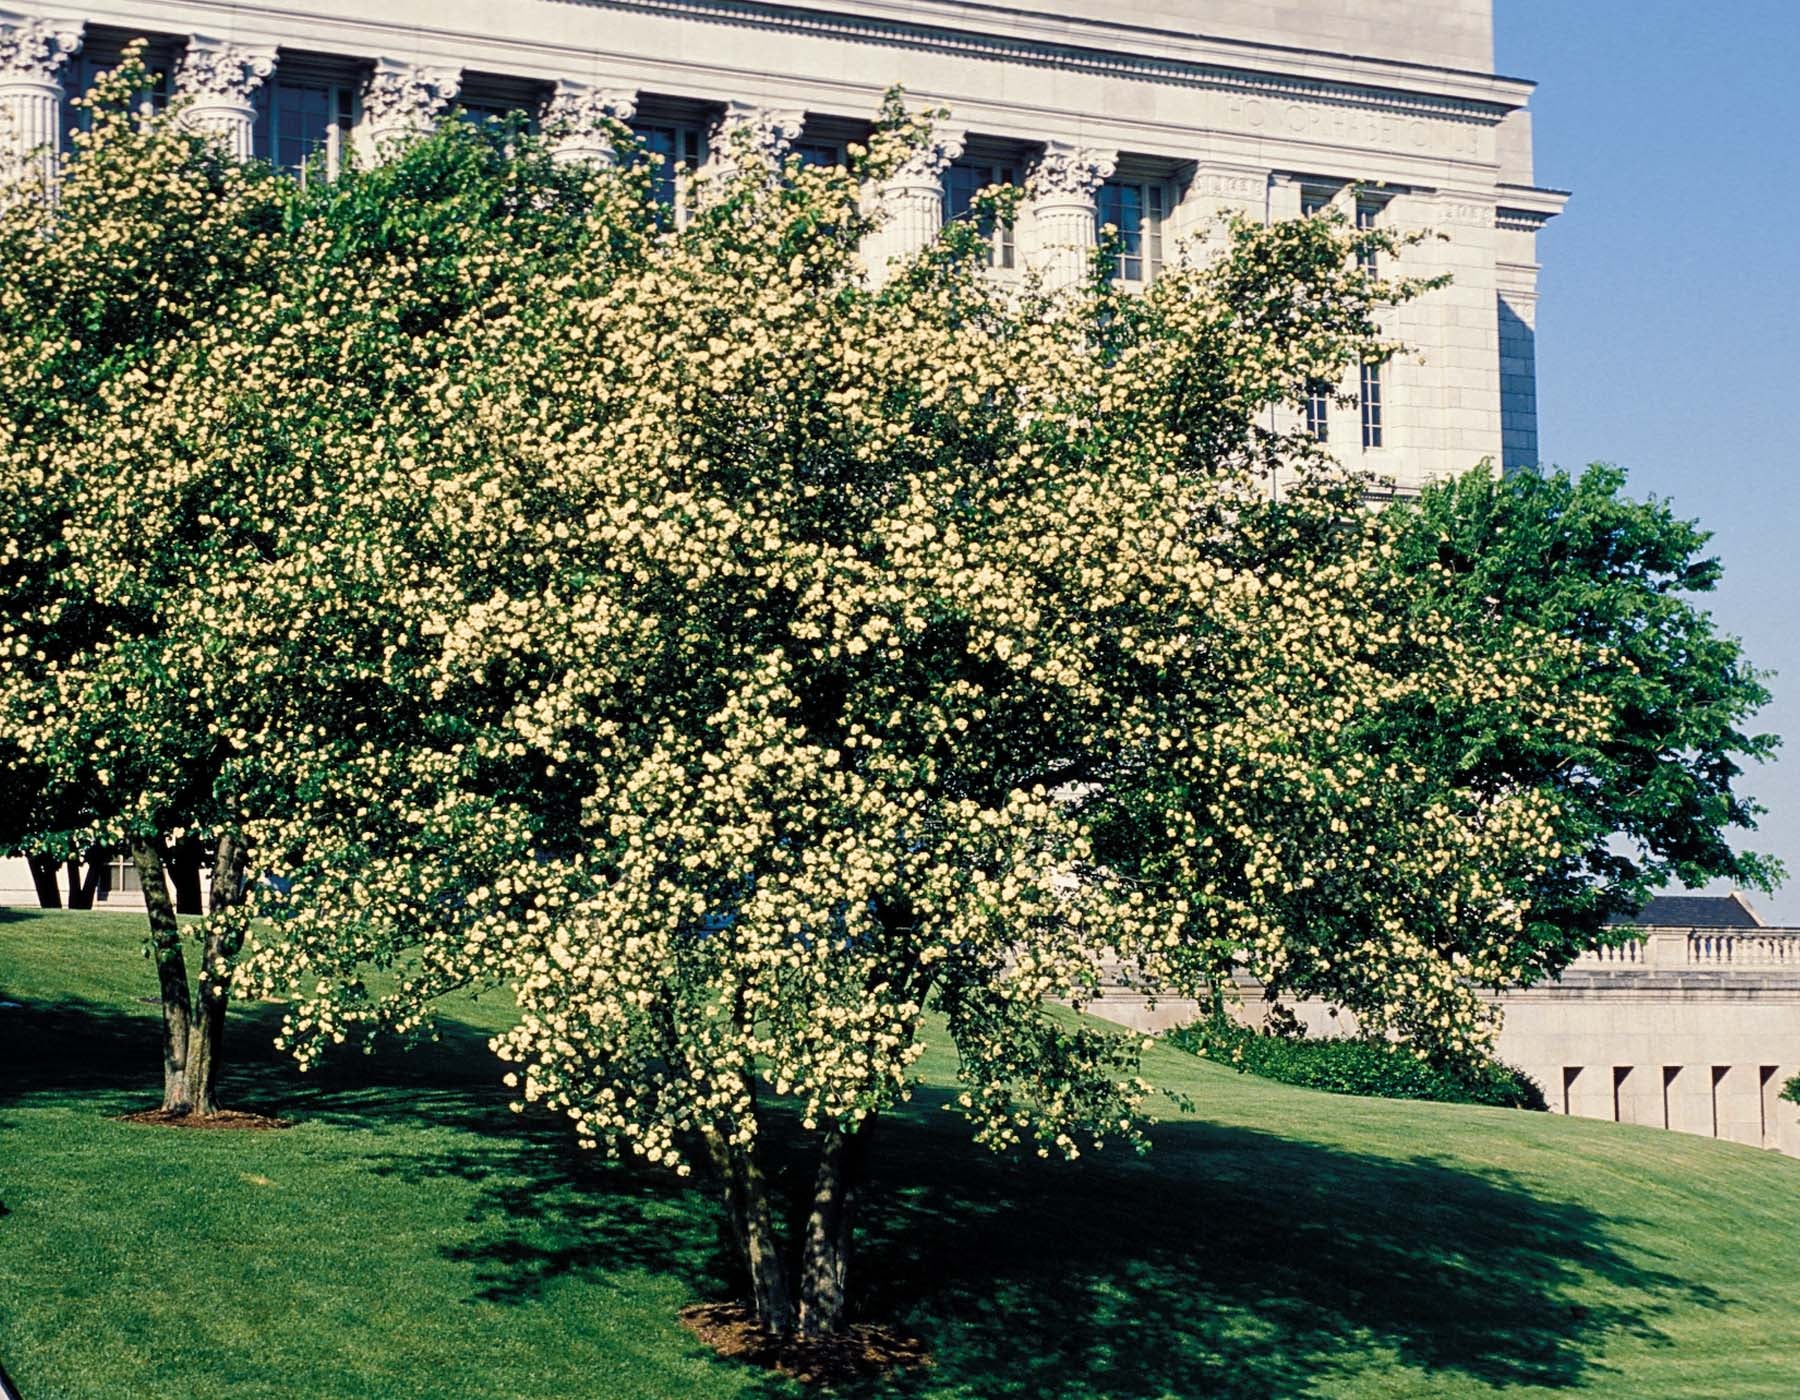 Photo of hawthorn trees blooming on lawn of Missouri state capitol